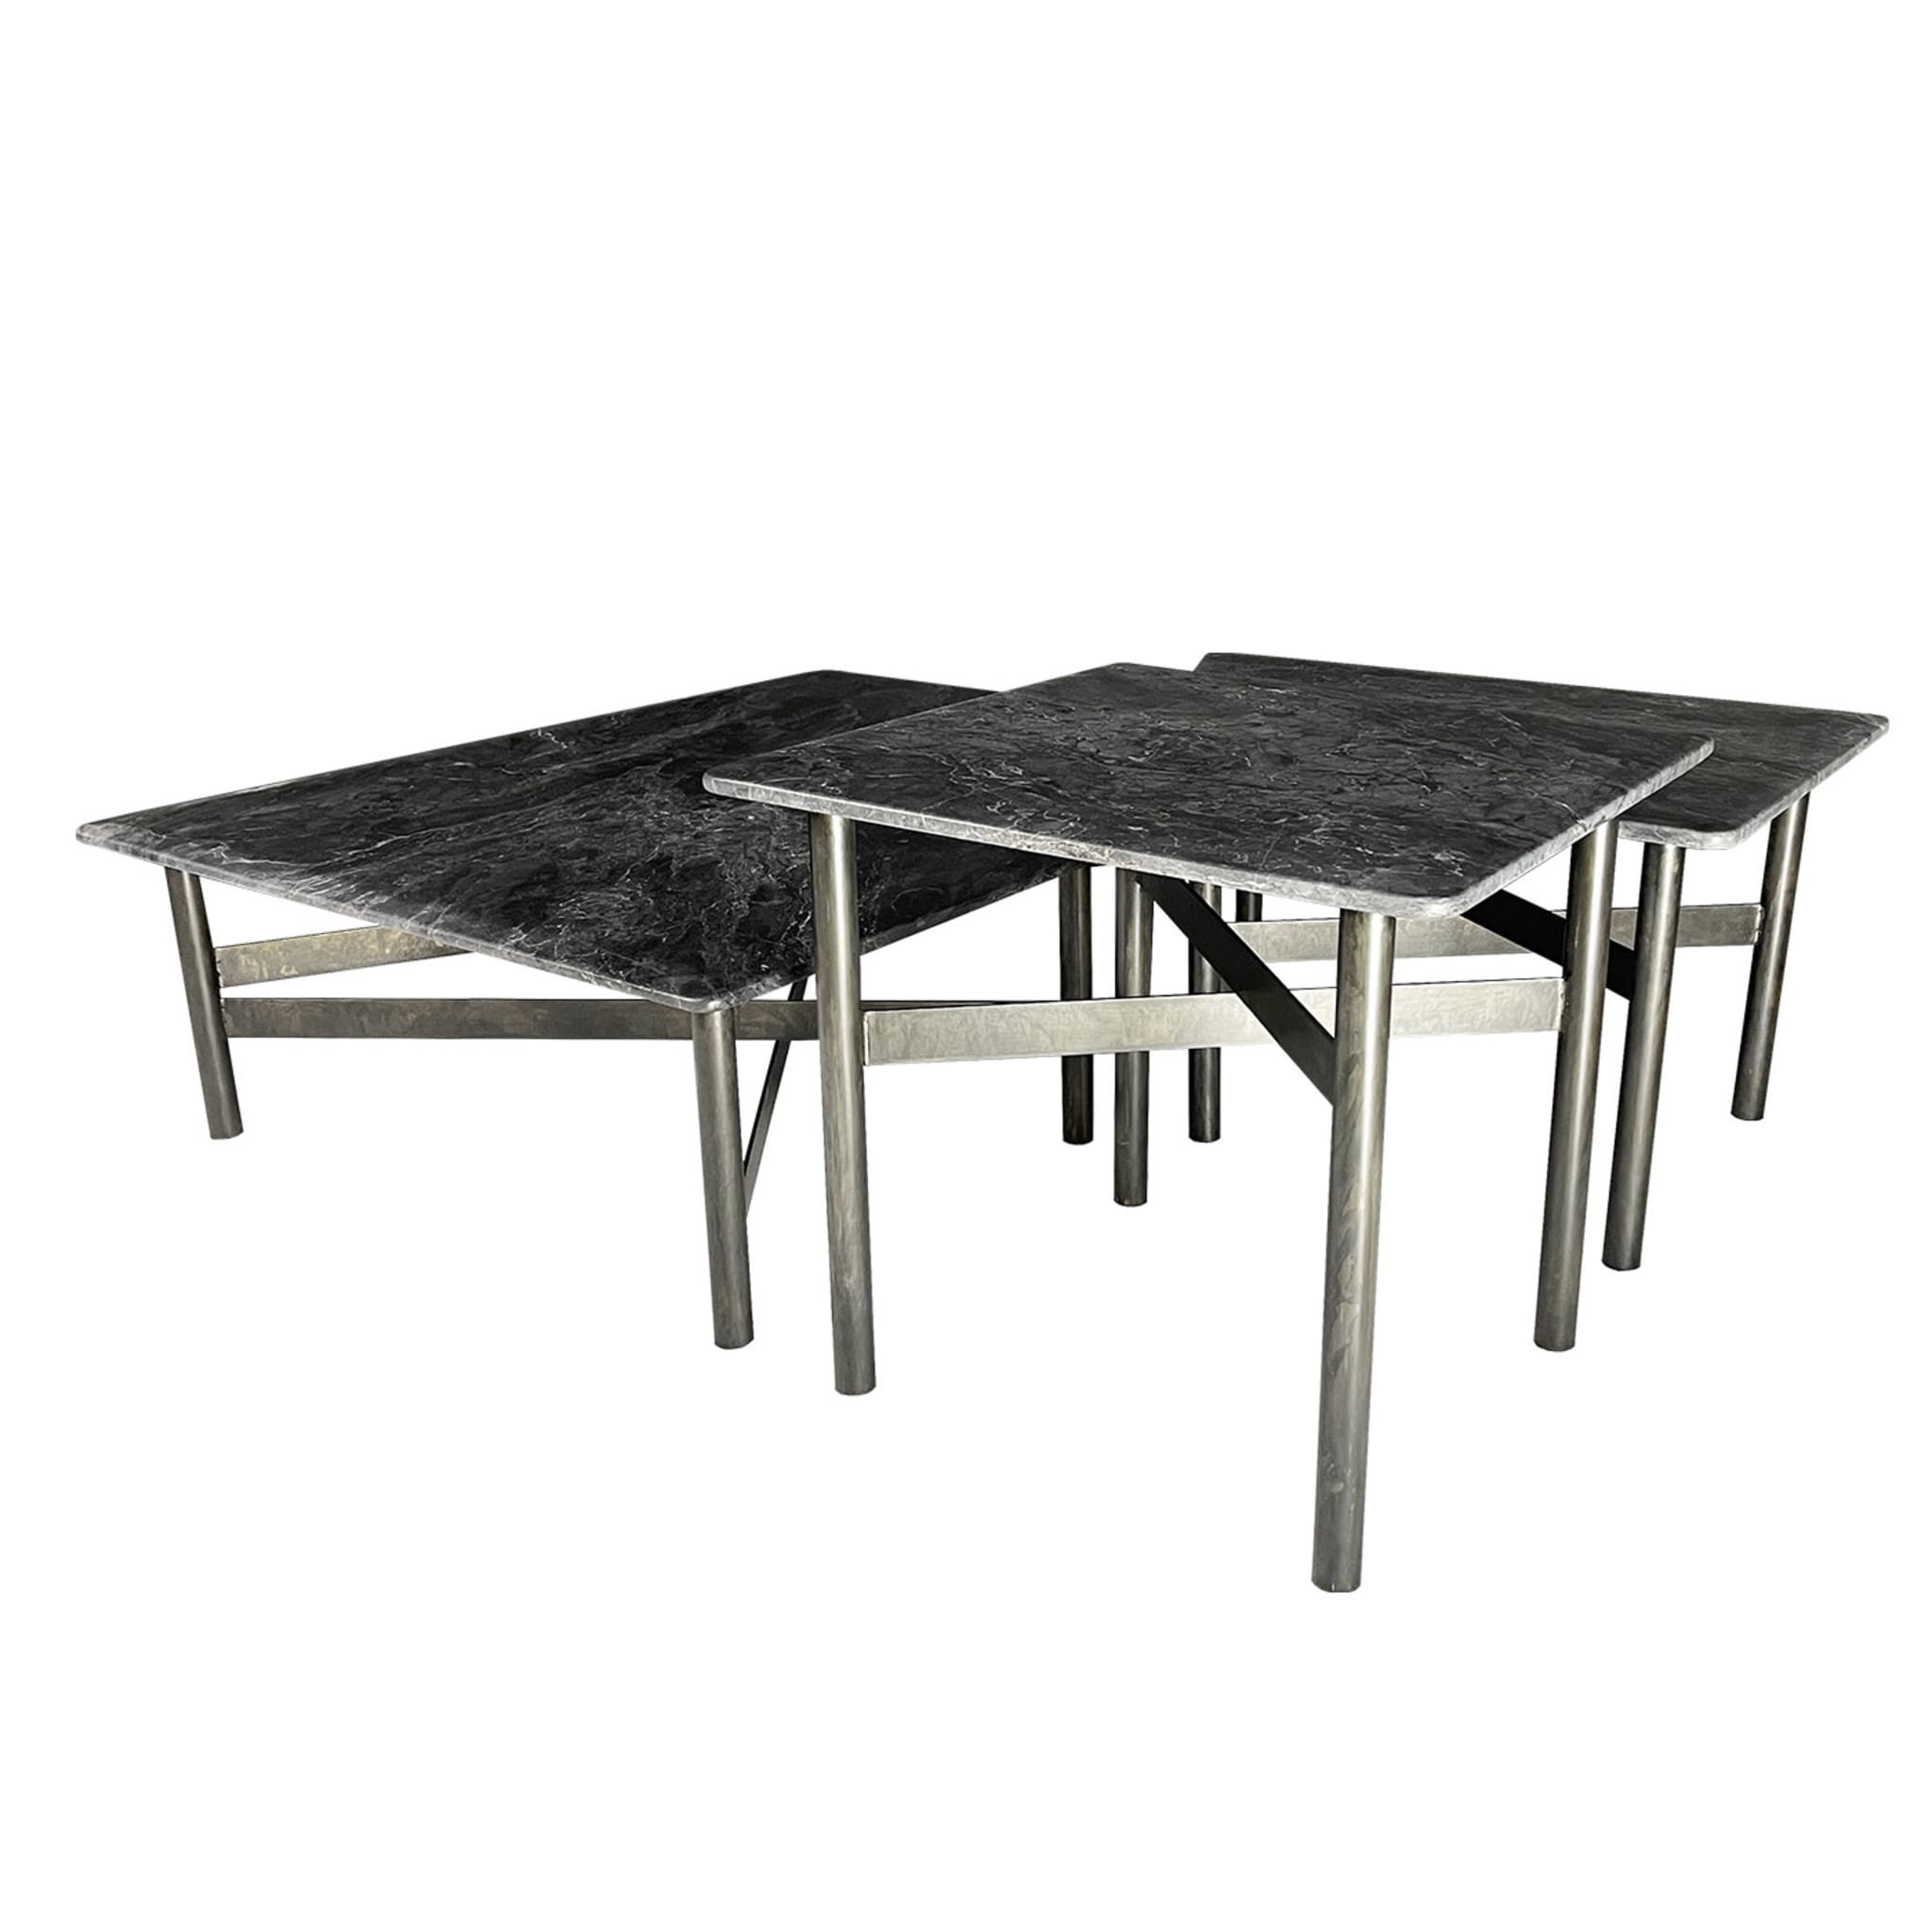 Eneolitica Twins Set of 3 Coffee Tables - Alternative view 2